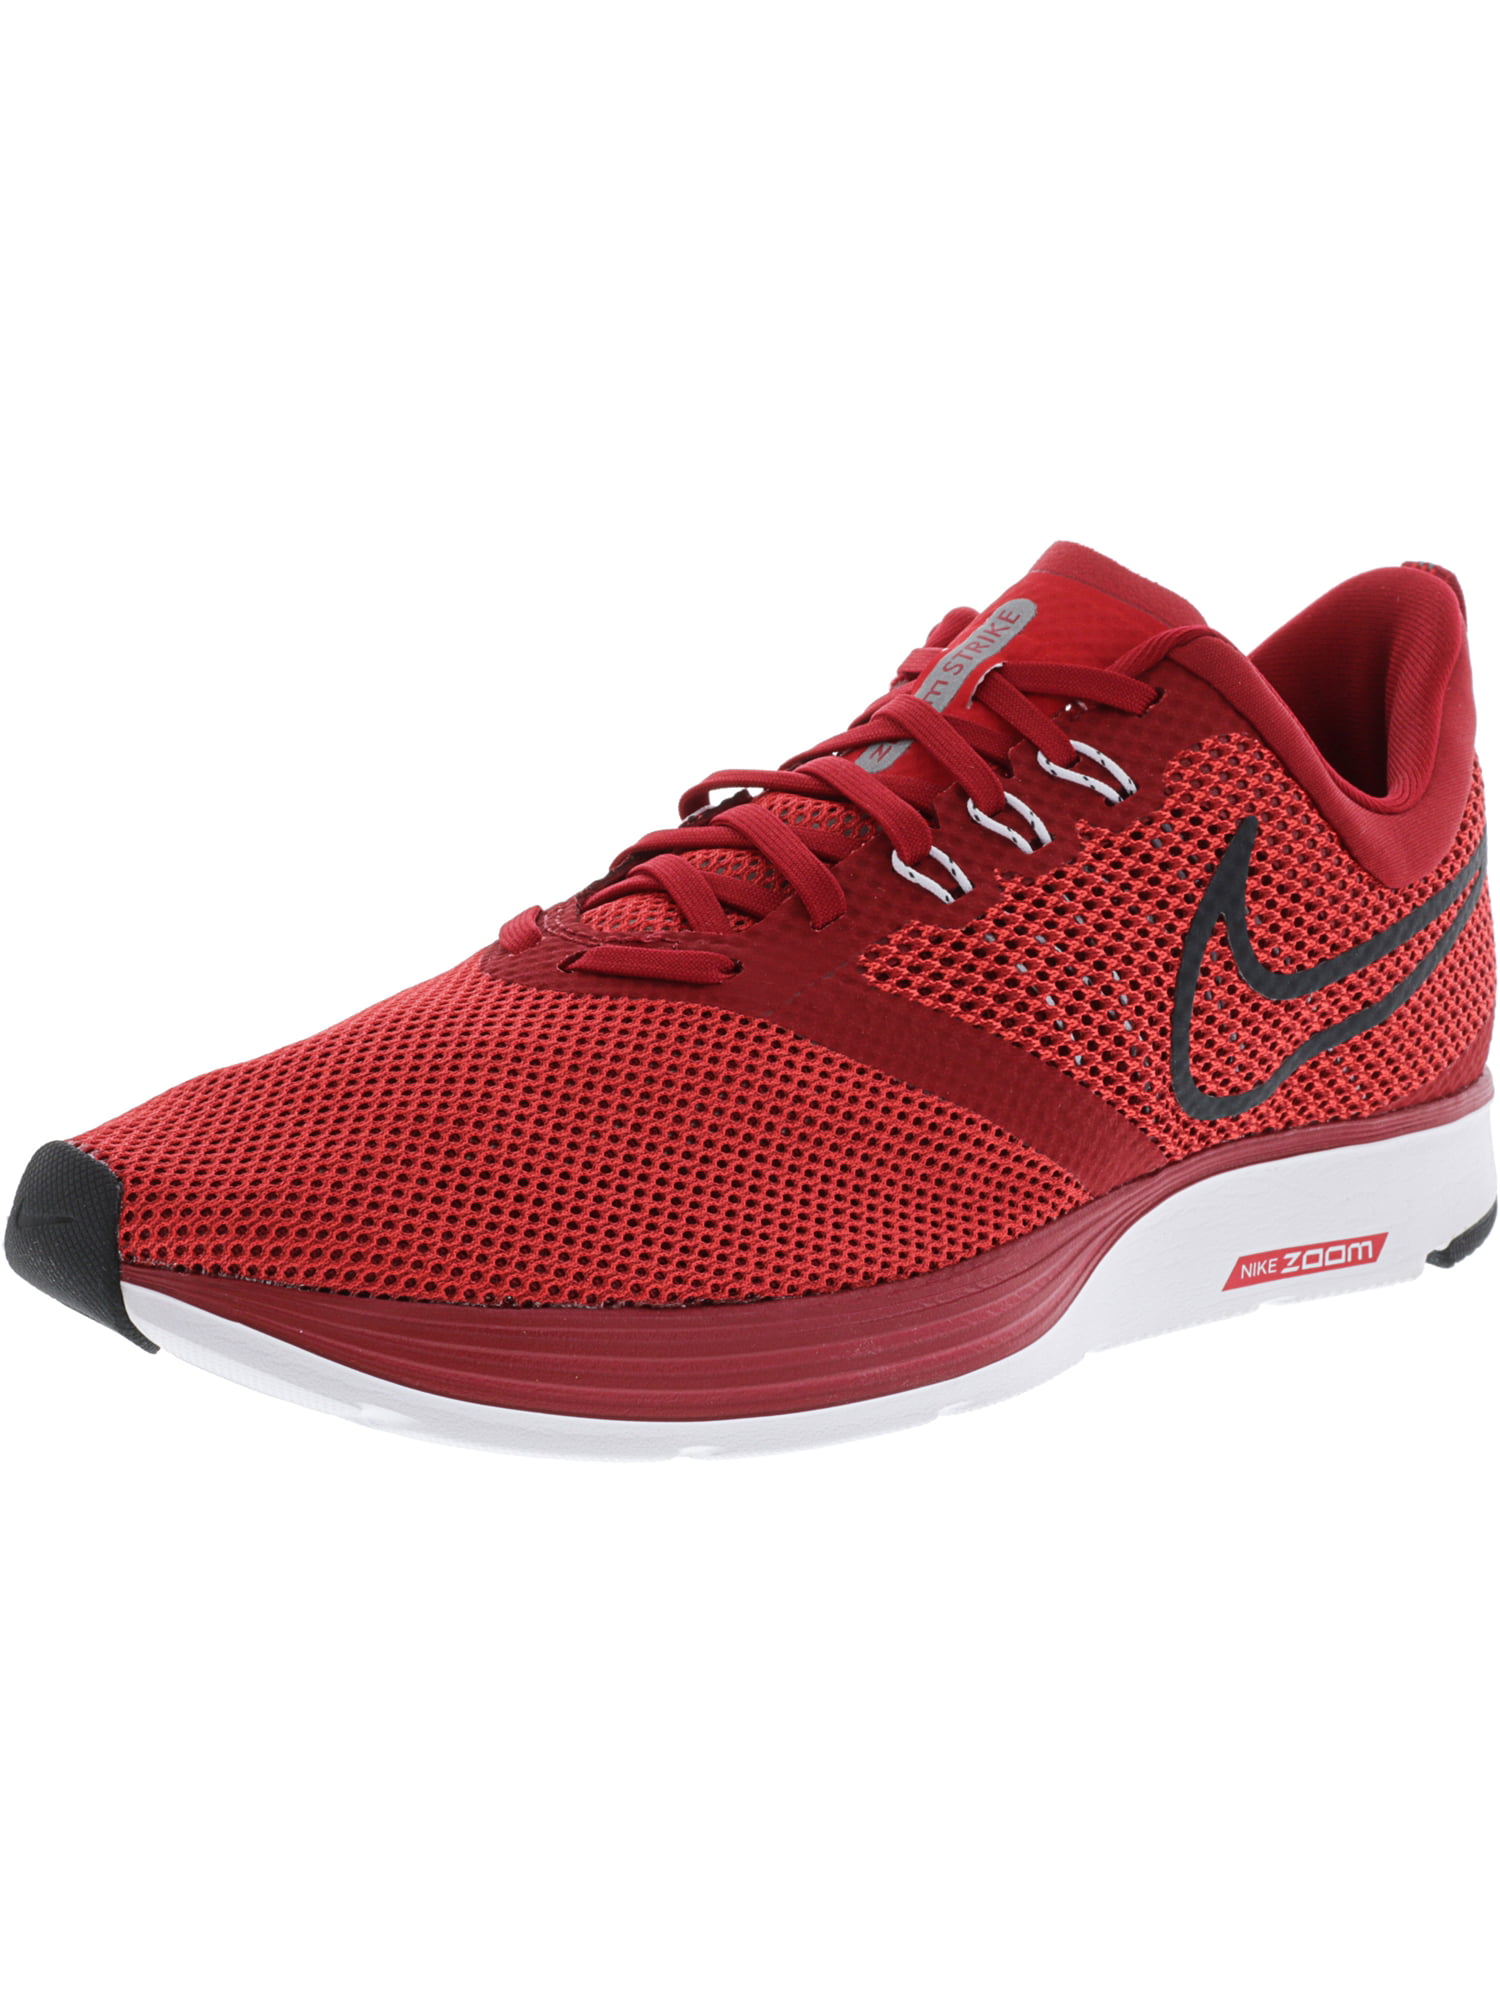 Nike Men's Zoom Strike Gym Red / Anthracite - Speed Ankle-High Mesh ...